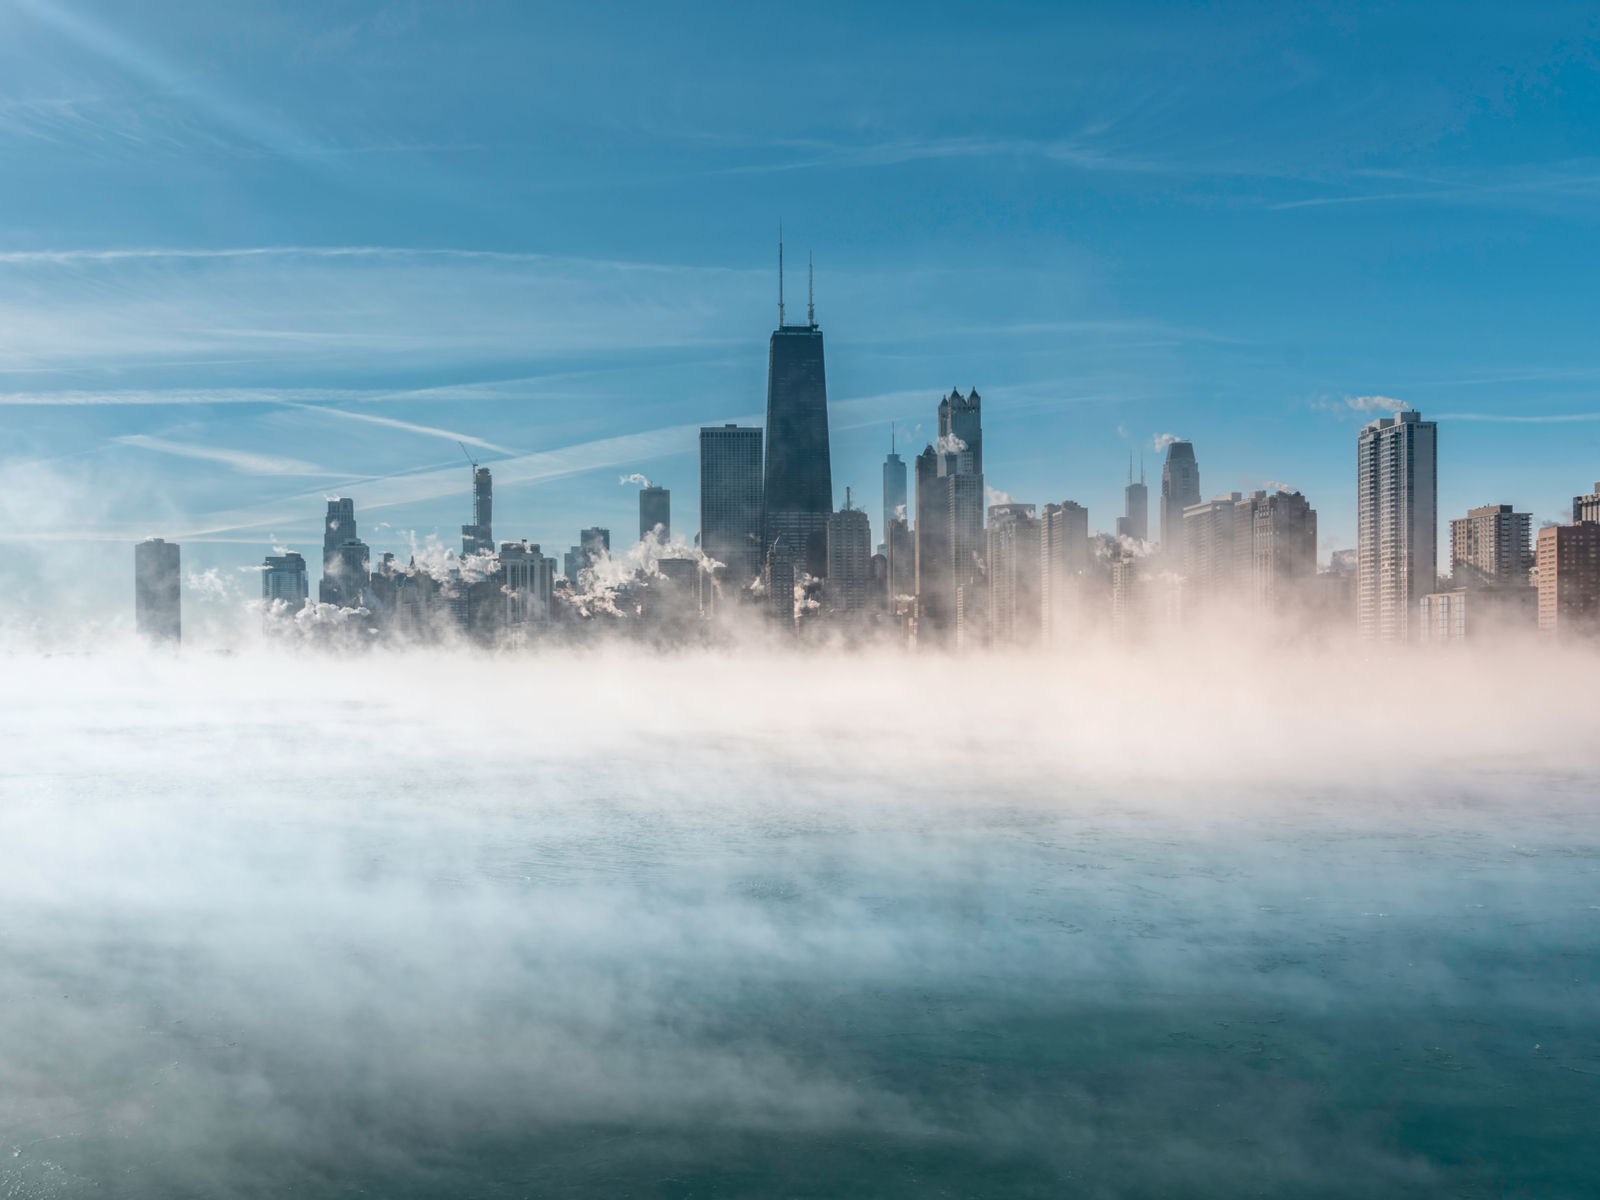 Worst time to visit Chicago symbolized by a photo of Lake Michigan with lots of fog and snow